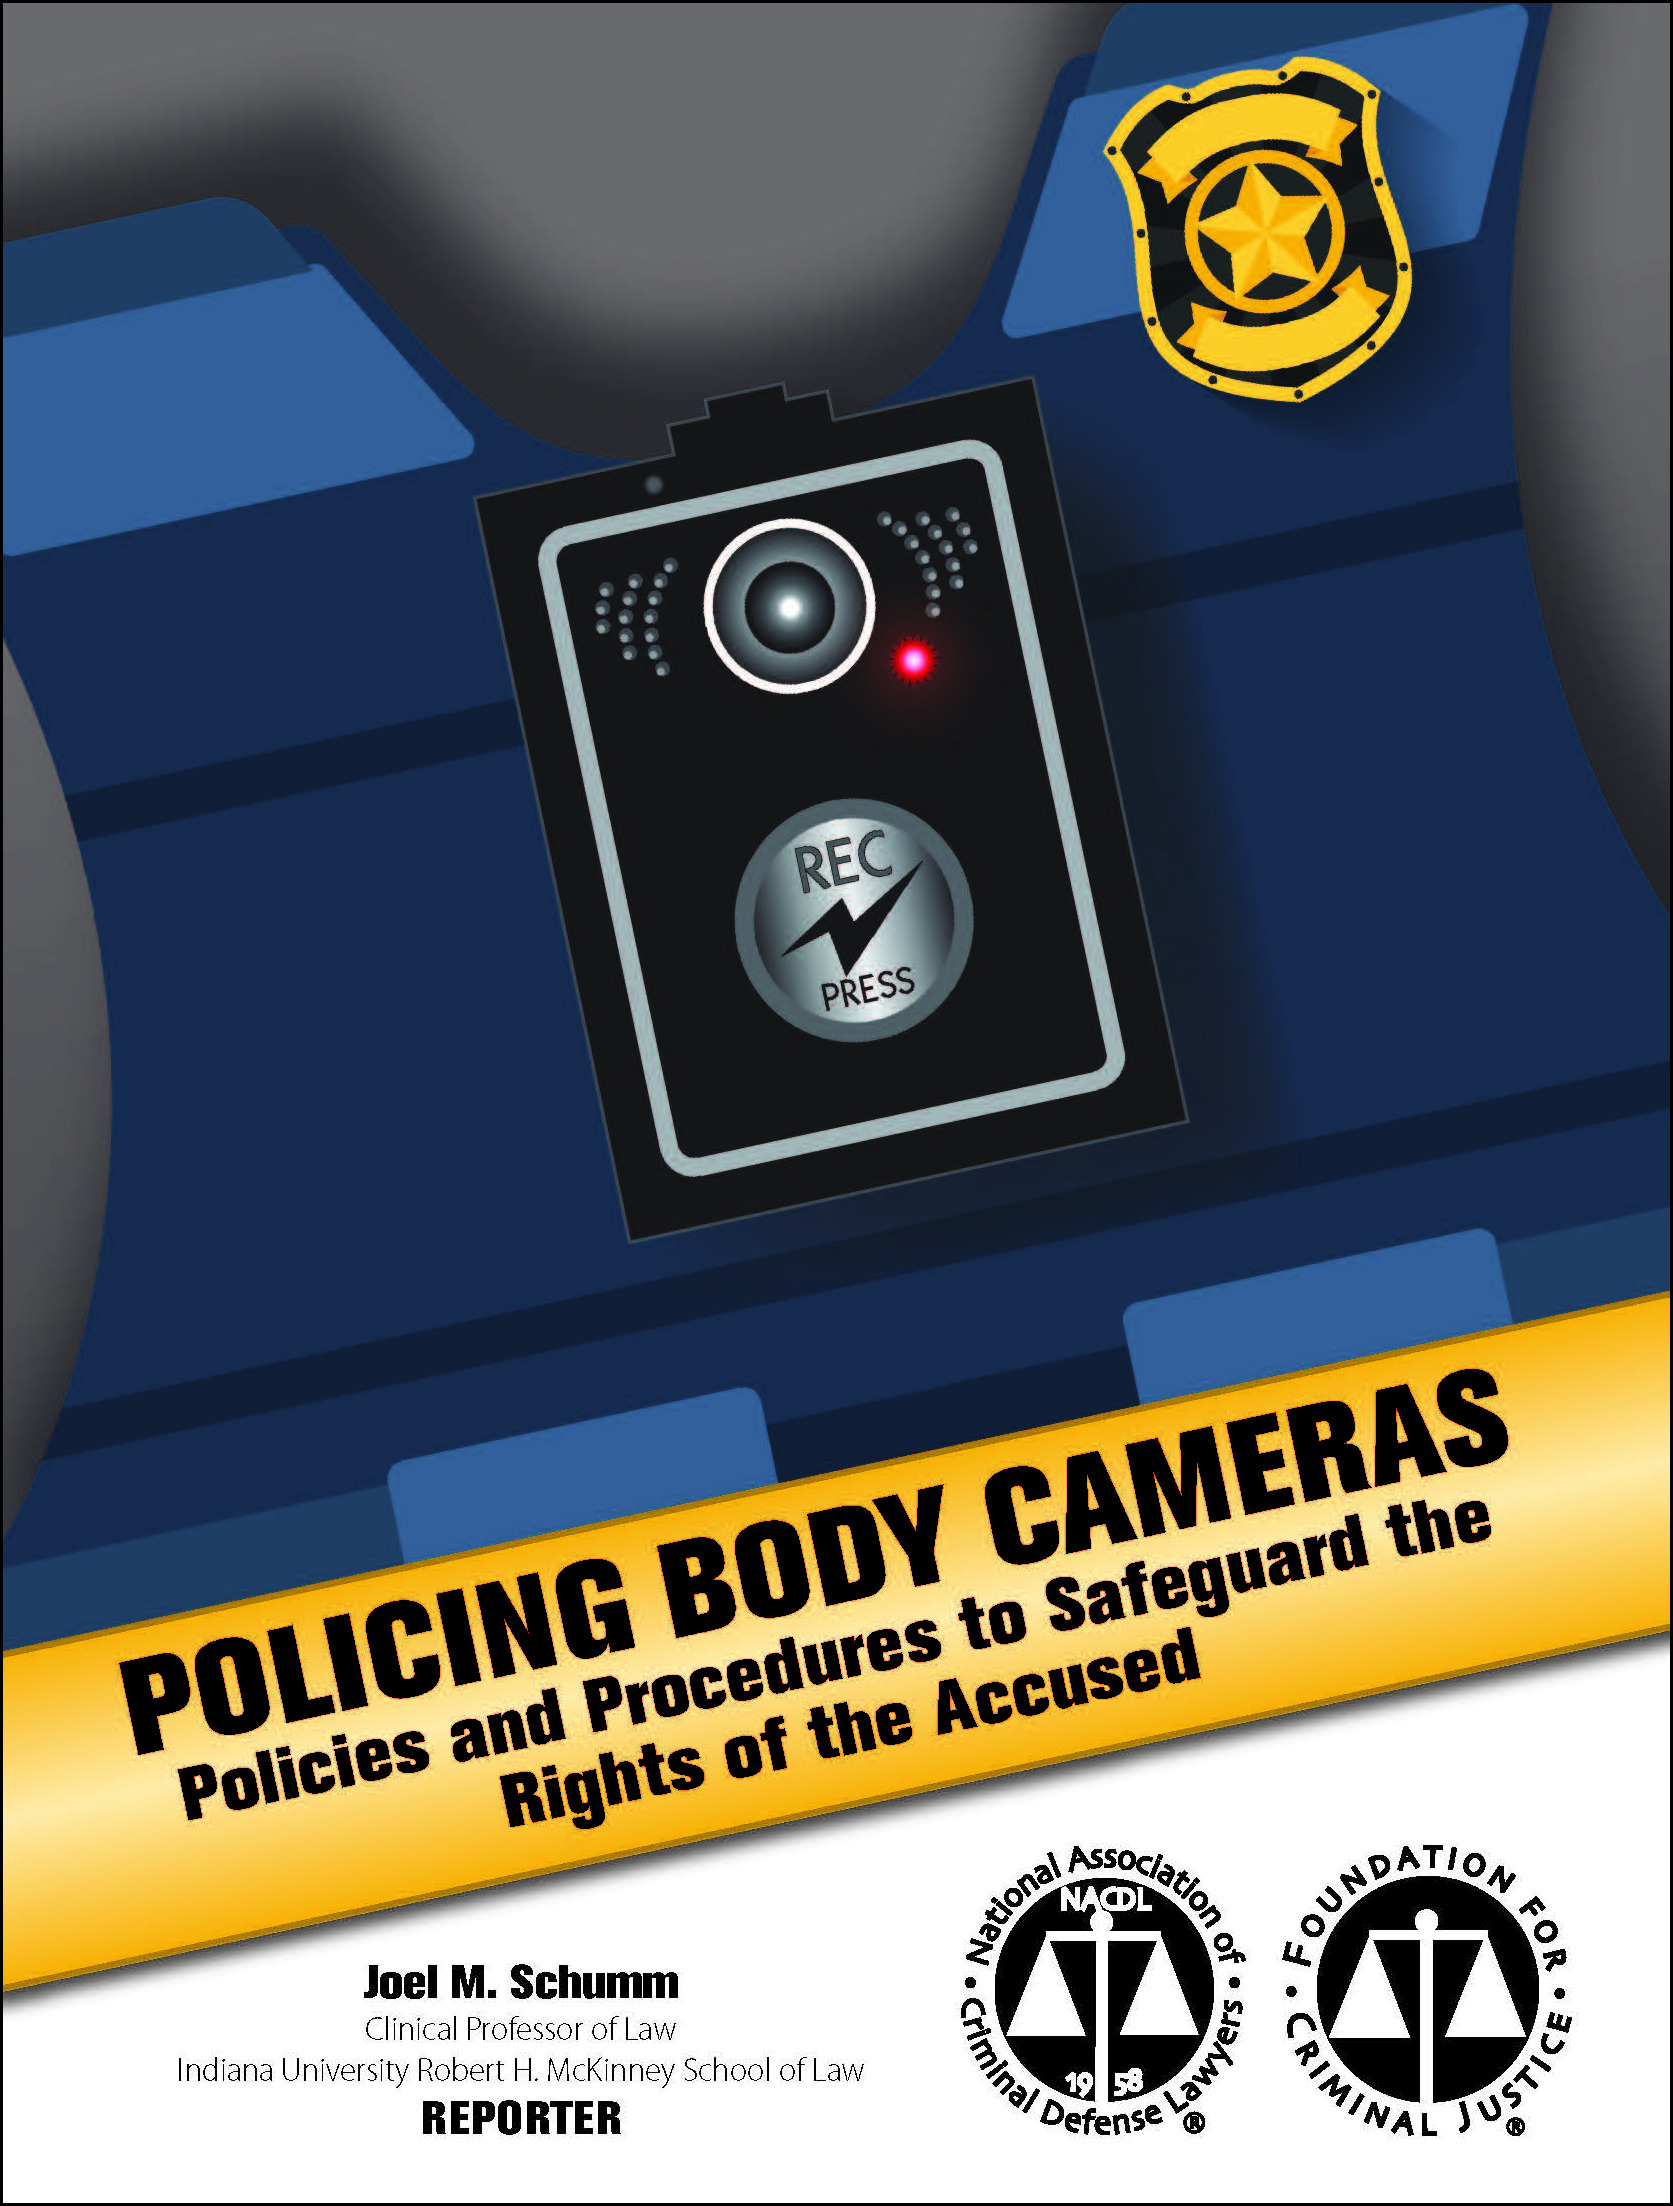 Cover for NACDL report Policing Body Cameras: Policies and Procedures to Safeguard the Rights of the Accused